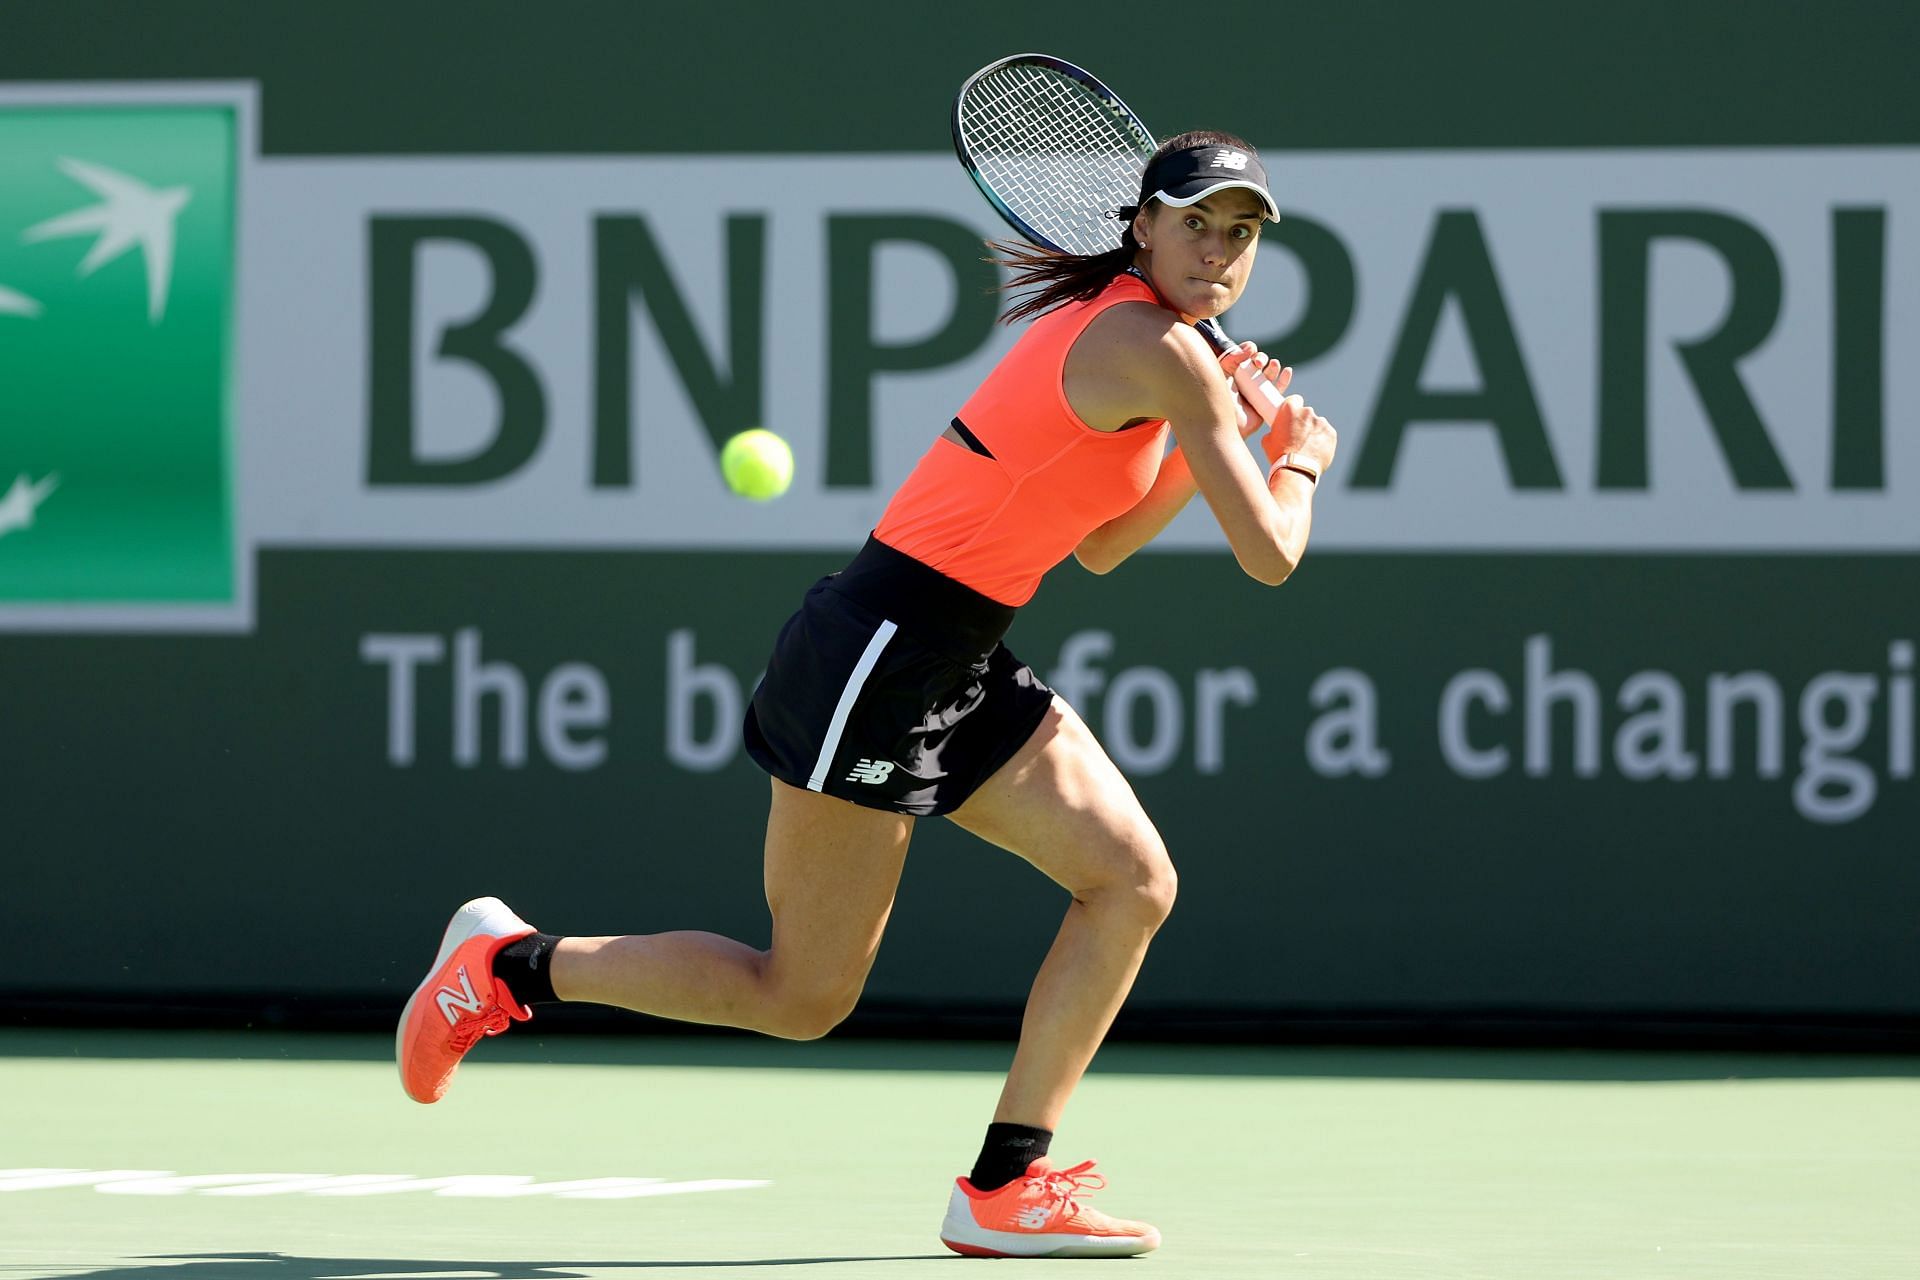 Cirstea in action at the BNP Paribas Open